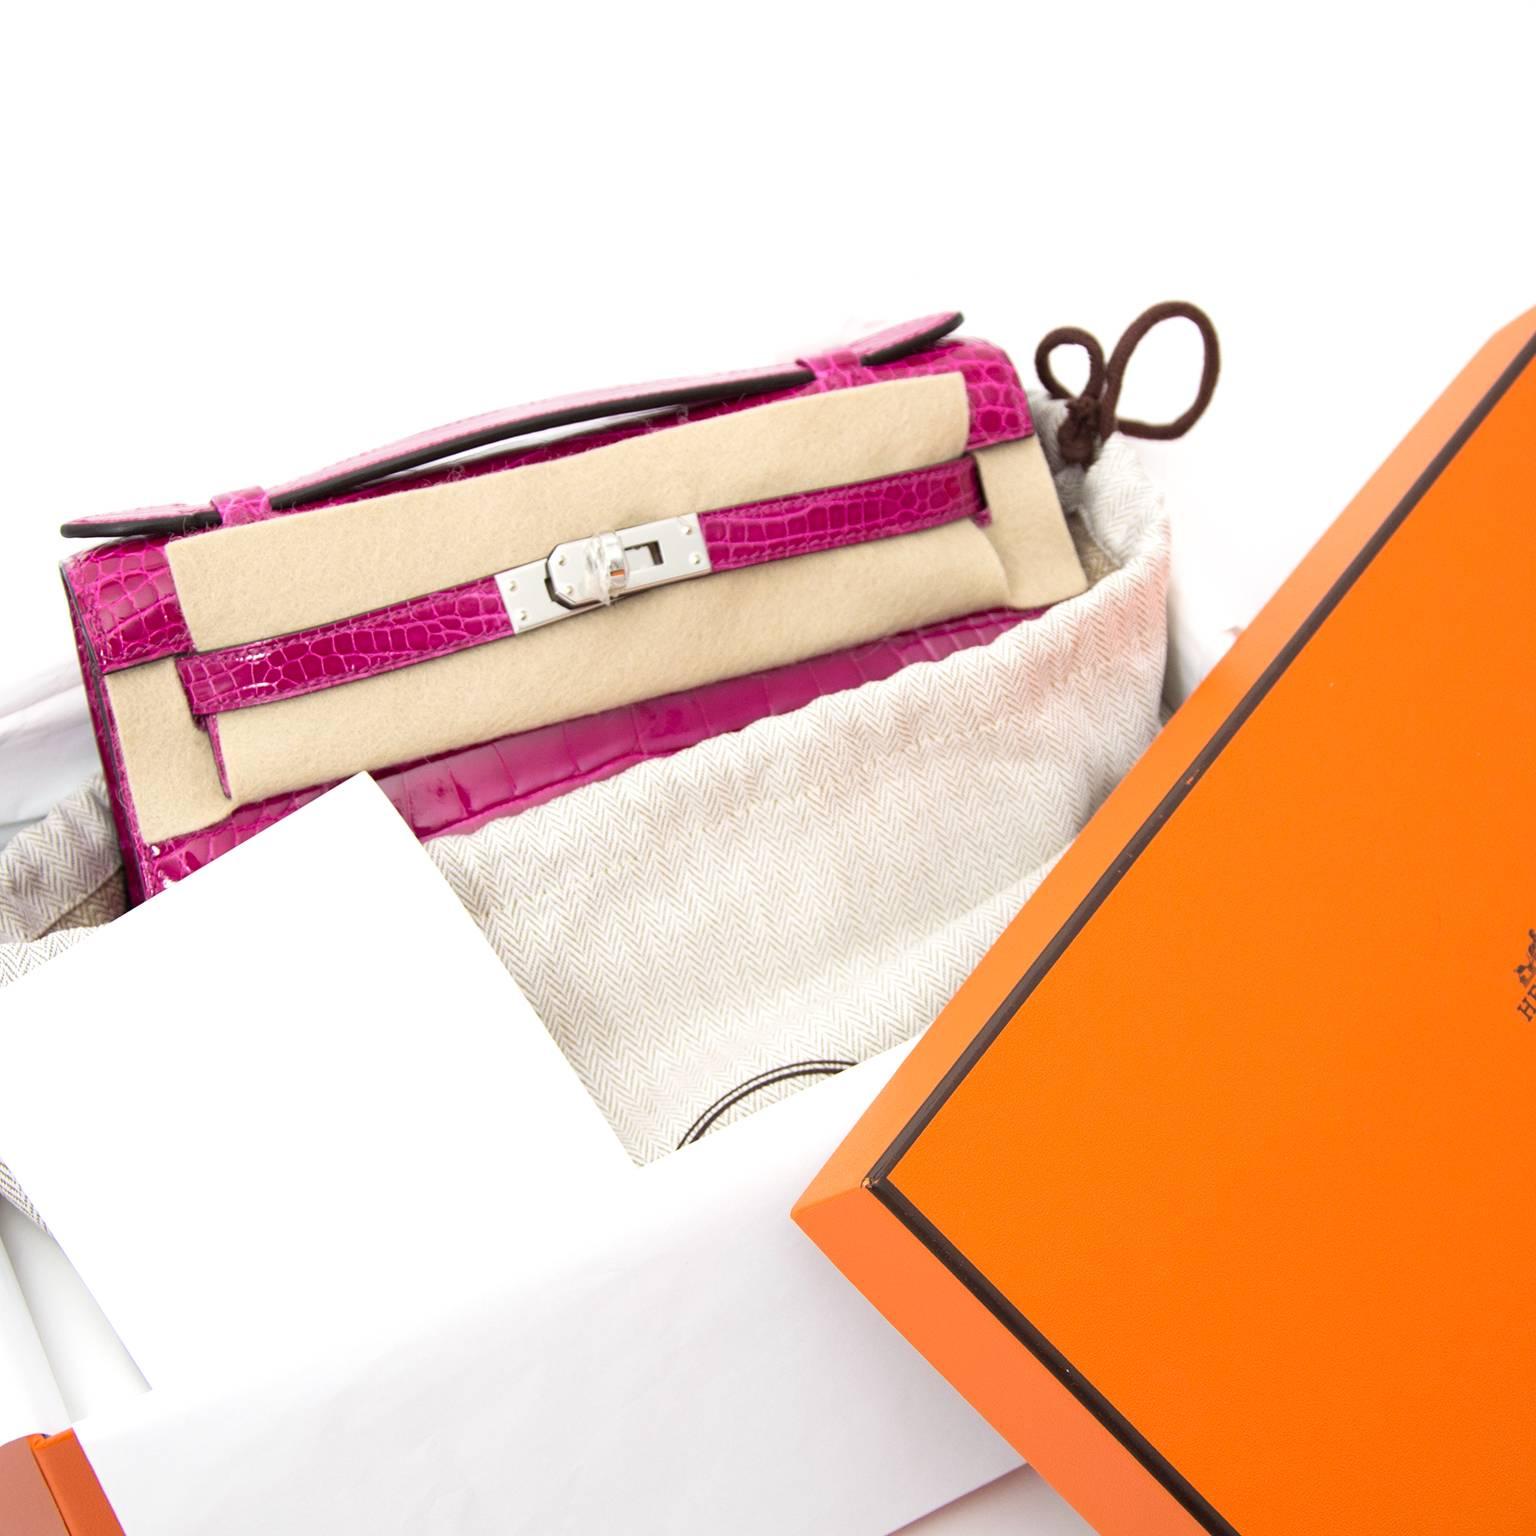 Rare brand new Hermes Kelly Pochette Rose SheheRazade Croco Alligator .
Searching for an iconic Kelly in a clutch version? Meet this exquisite Hermès Kelly Cut Pochette.
This perfect day and night piece is made out of crcoo alligator  accentuated